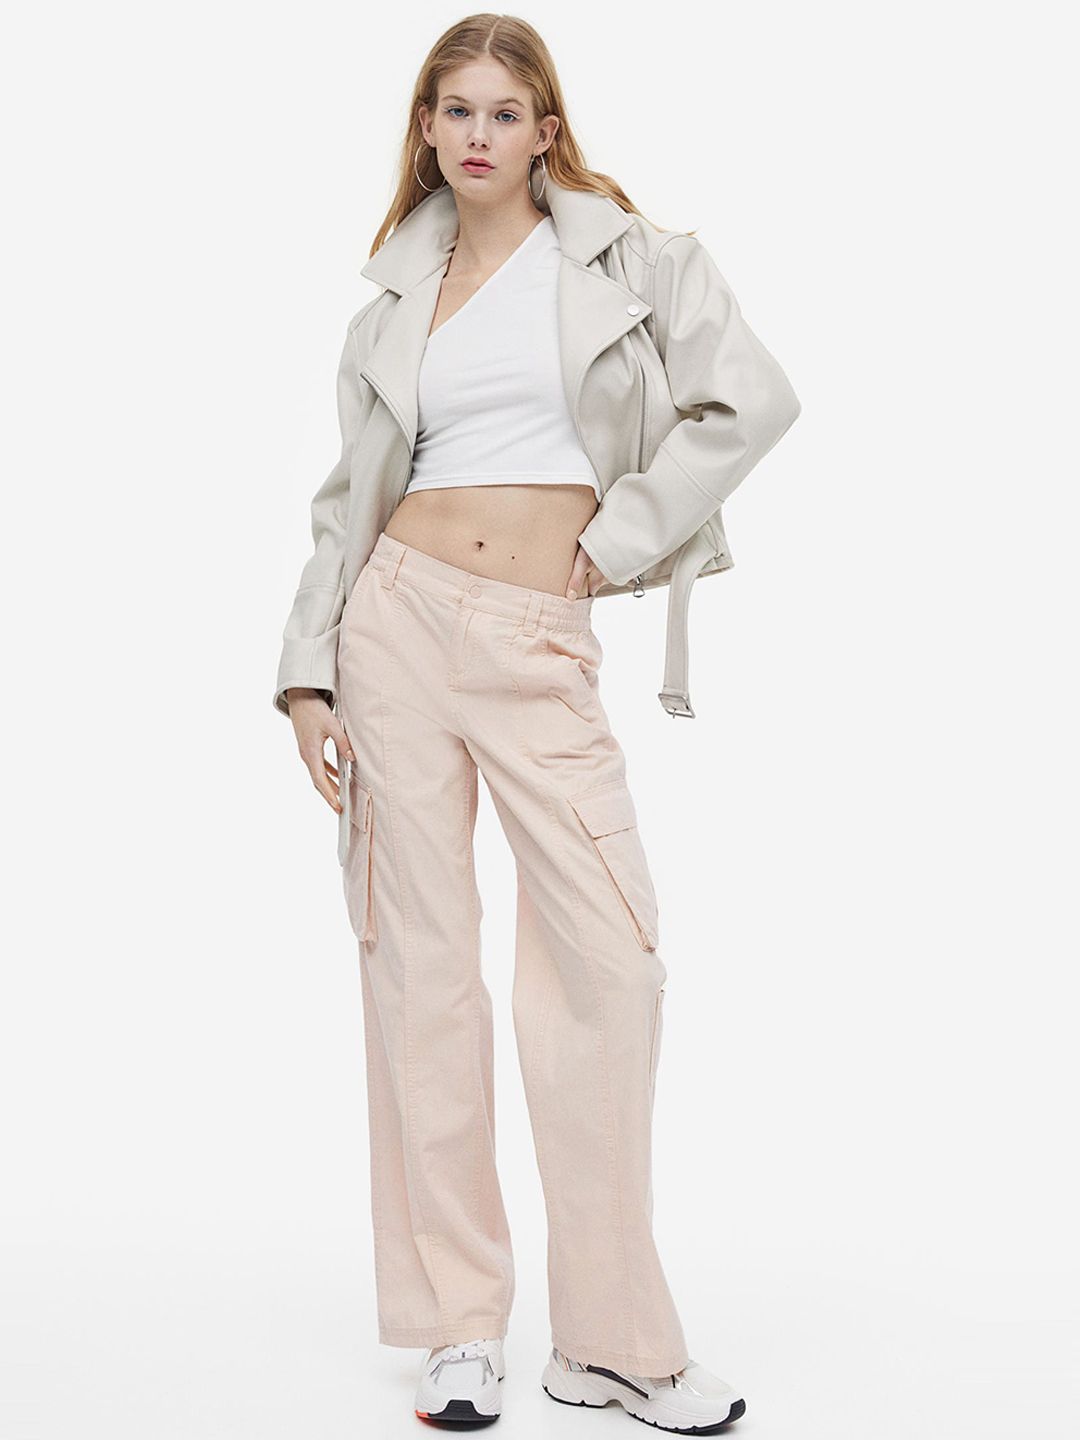 H&M Women Canvas Cargo Trousers Price in India